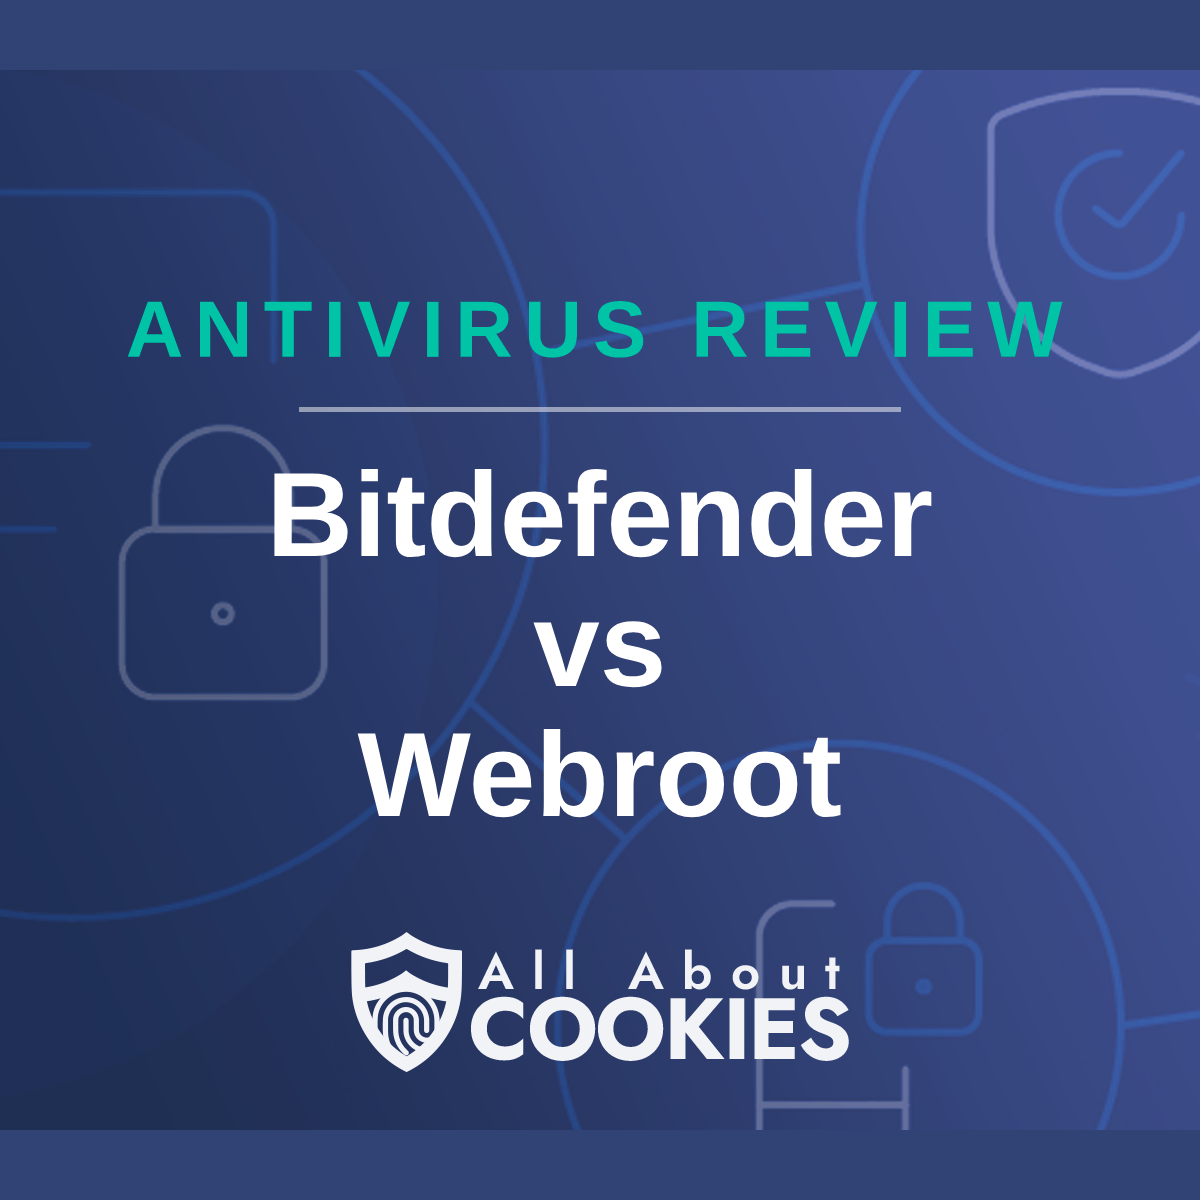 A blue background with images of locks and shields with the text &quot;Bitdefender vs Webroot&quot; and the All About Cookies logo. 